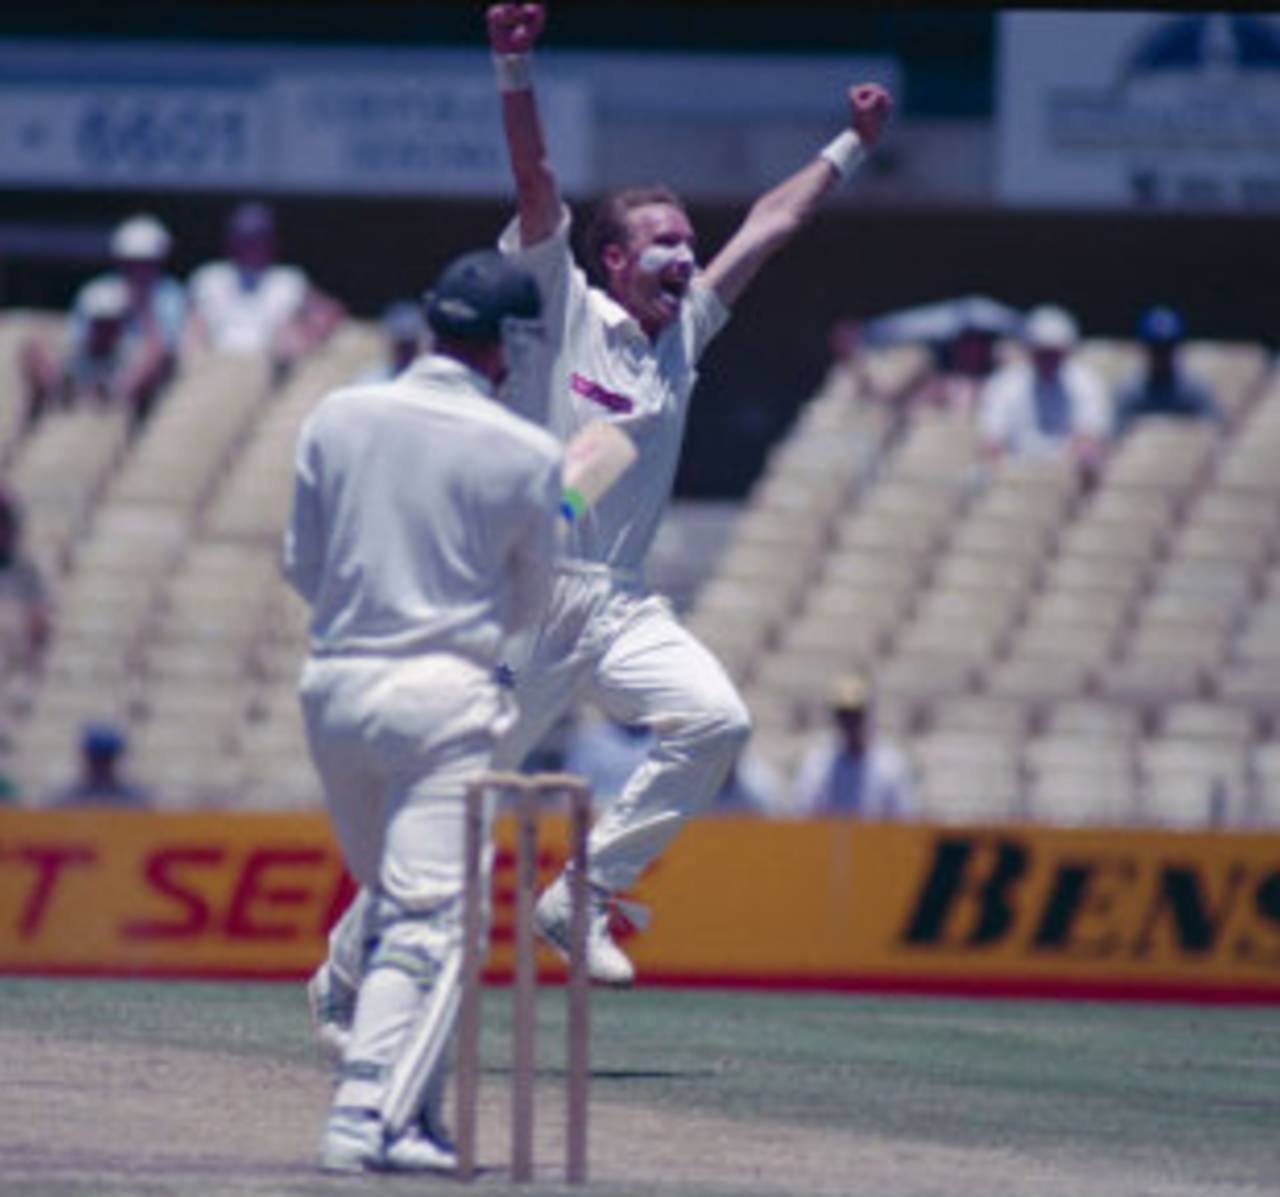 Allan Donald celebrates taking the wicket of Damien Martyn, Australia v South Africa, second Test, Sydney, 5 January 1994